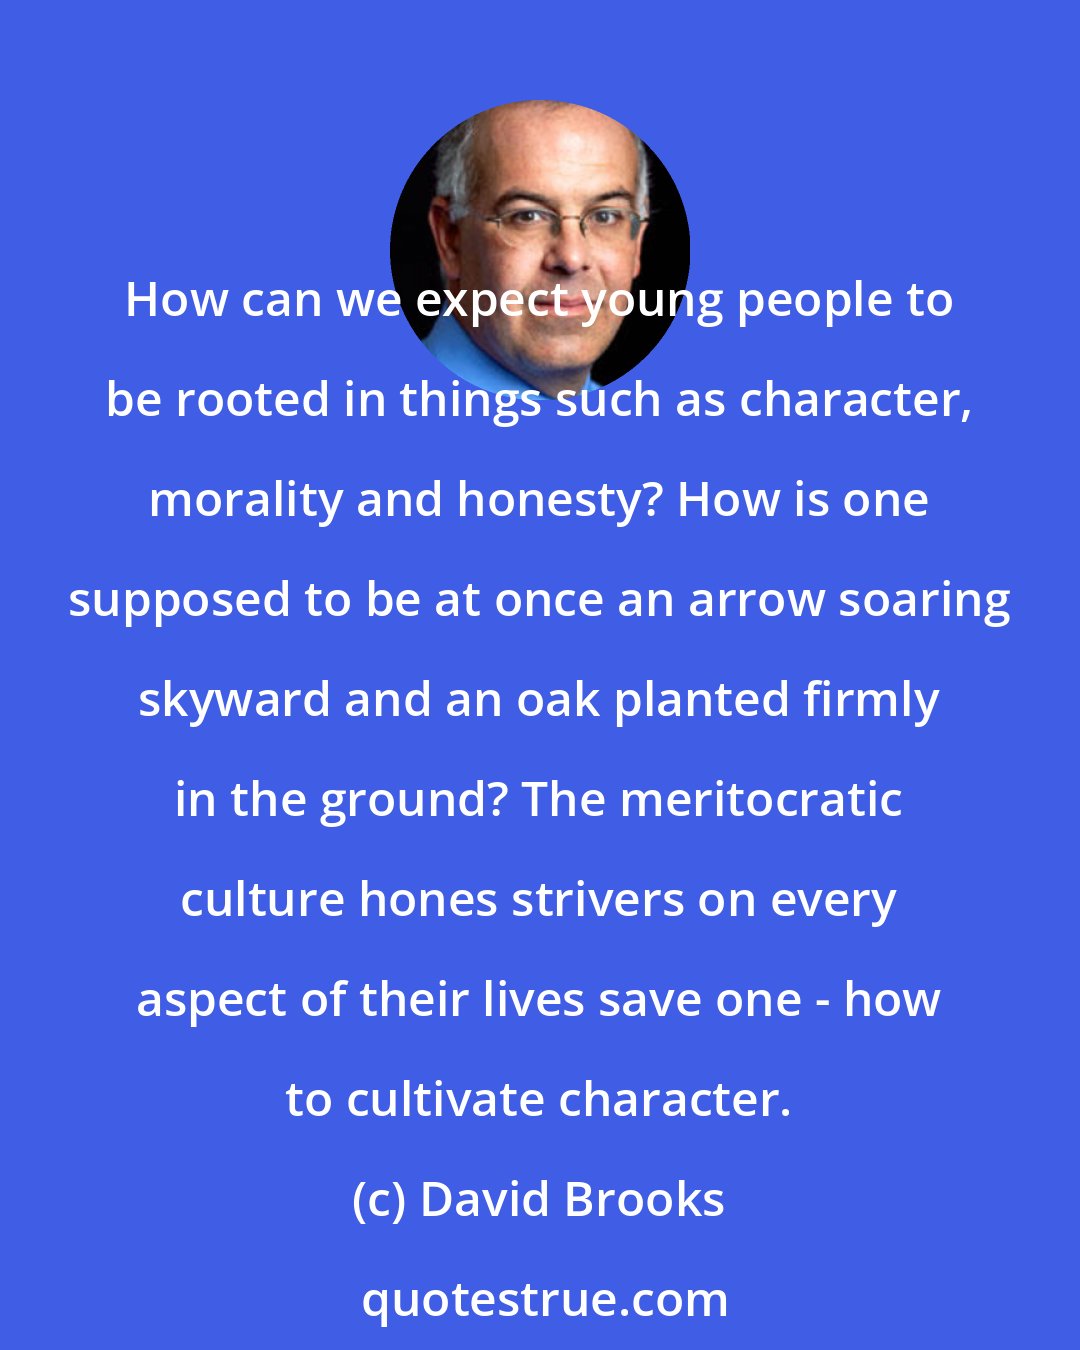 David Brooks: How can we expect young people to be rooted in things such as character, morality and honesty? How is one supposed to be at once an arrow soaring skyward and an oak planted firmly in the ground? The meritocratic culture hones strivers on every aspect of their lives save one - how to cultivate character.